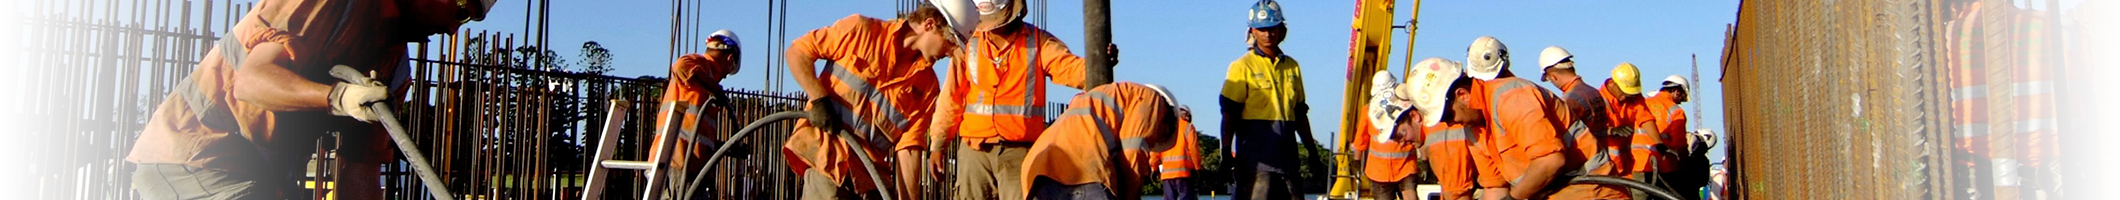 A group of people in safety uniforms working construction in between fences.